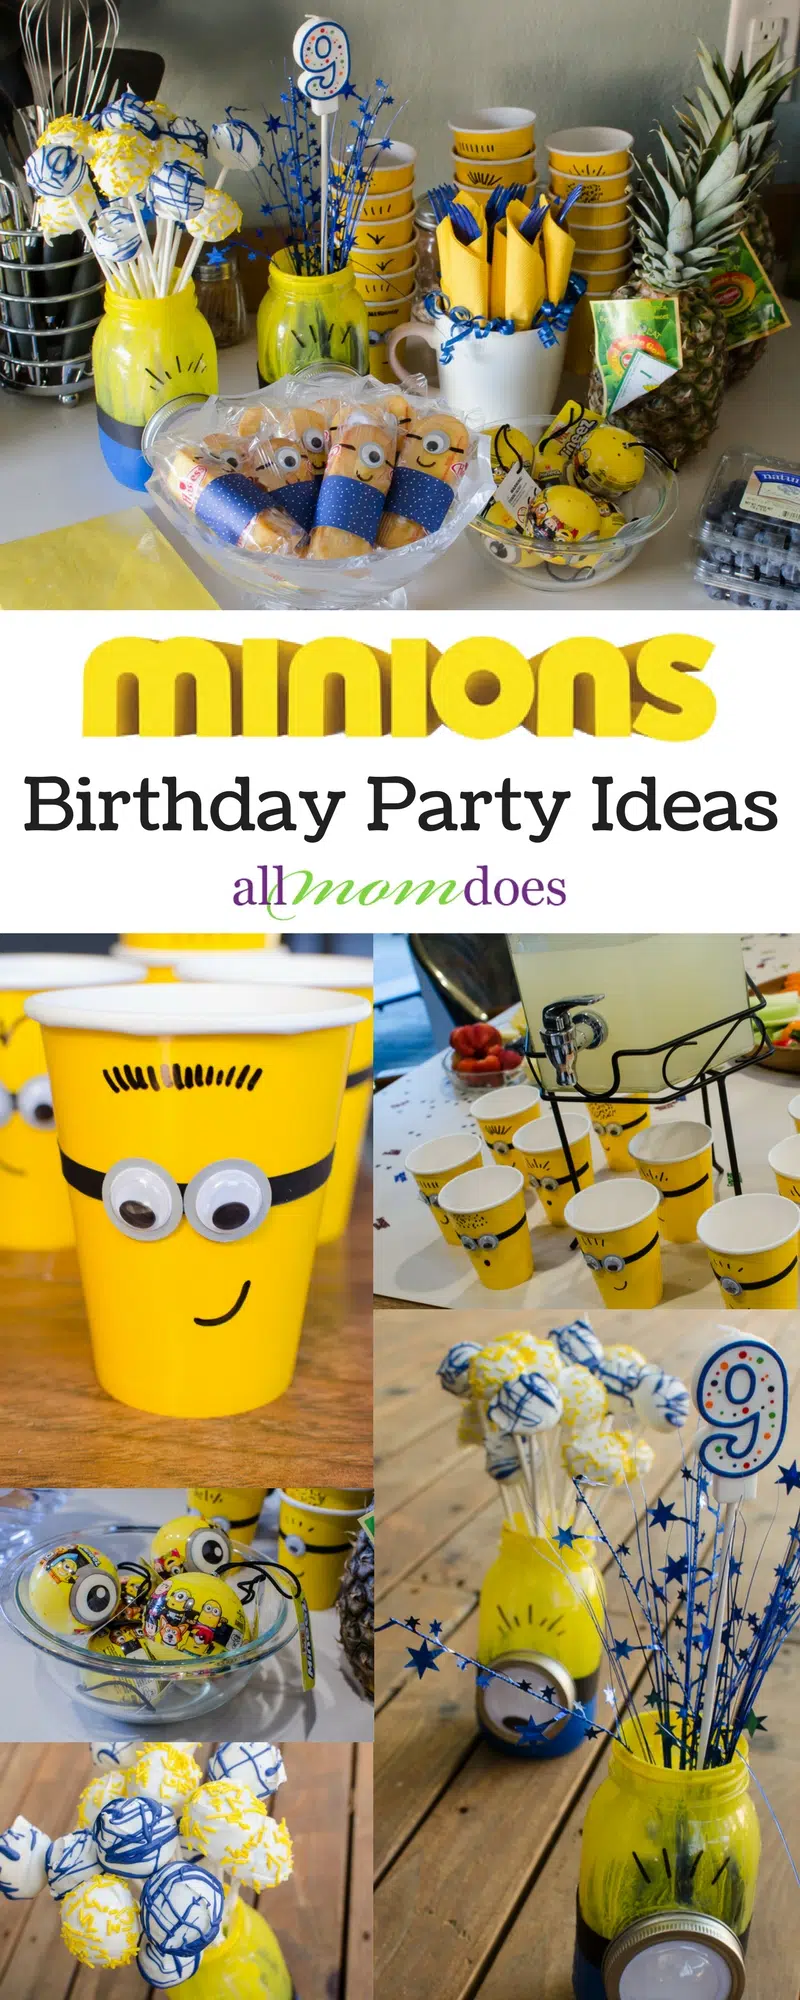 Minions birthday party ideas: Creative budget-friendly ideas for a Minions or Despicable Me theme. #birthdayparty #partyplanning #minions